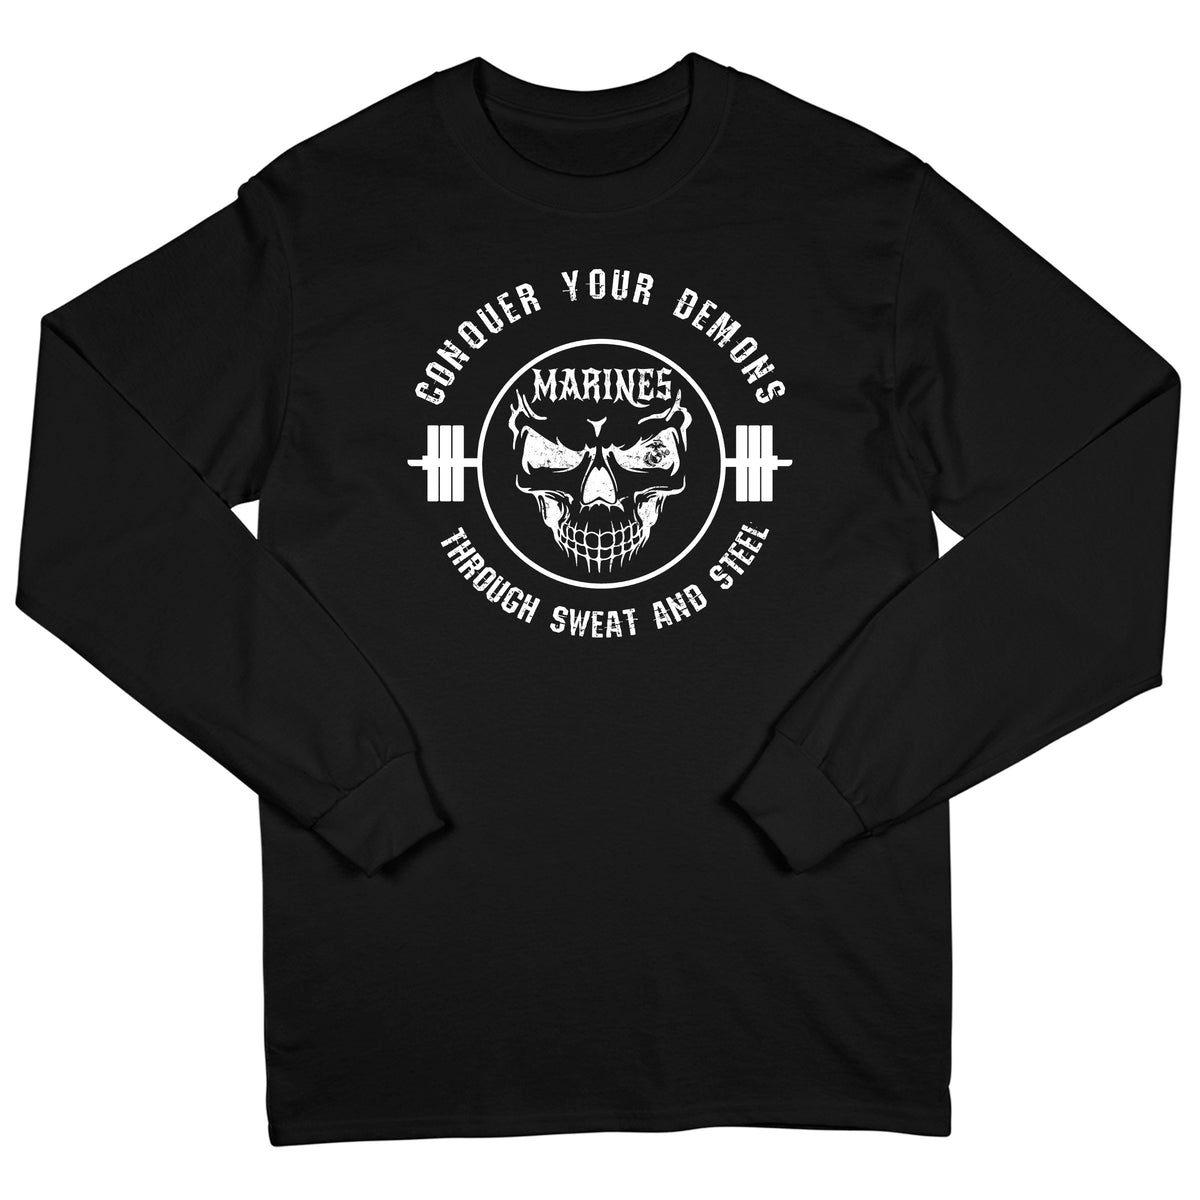 Conquer Your Demons Long Sleeve Tee